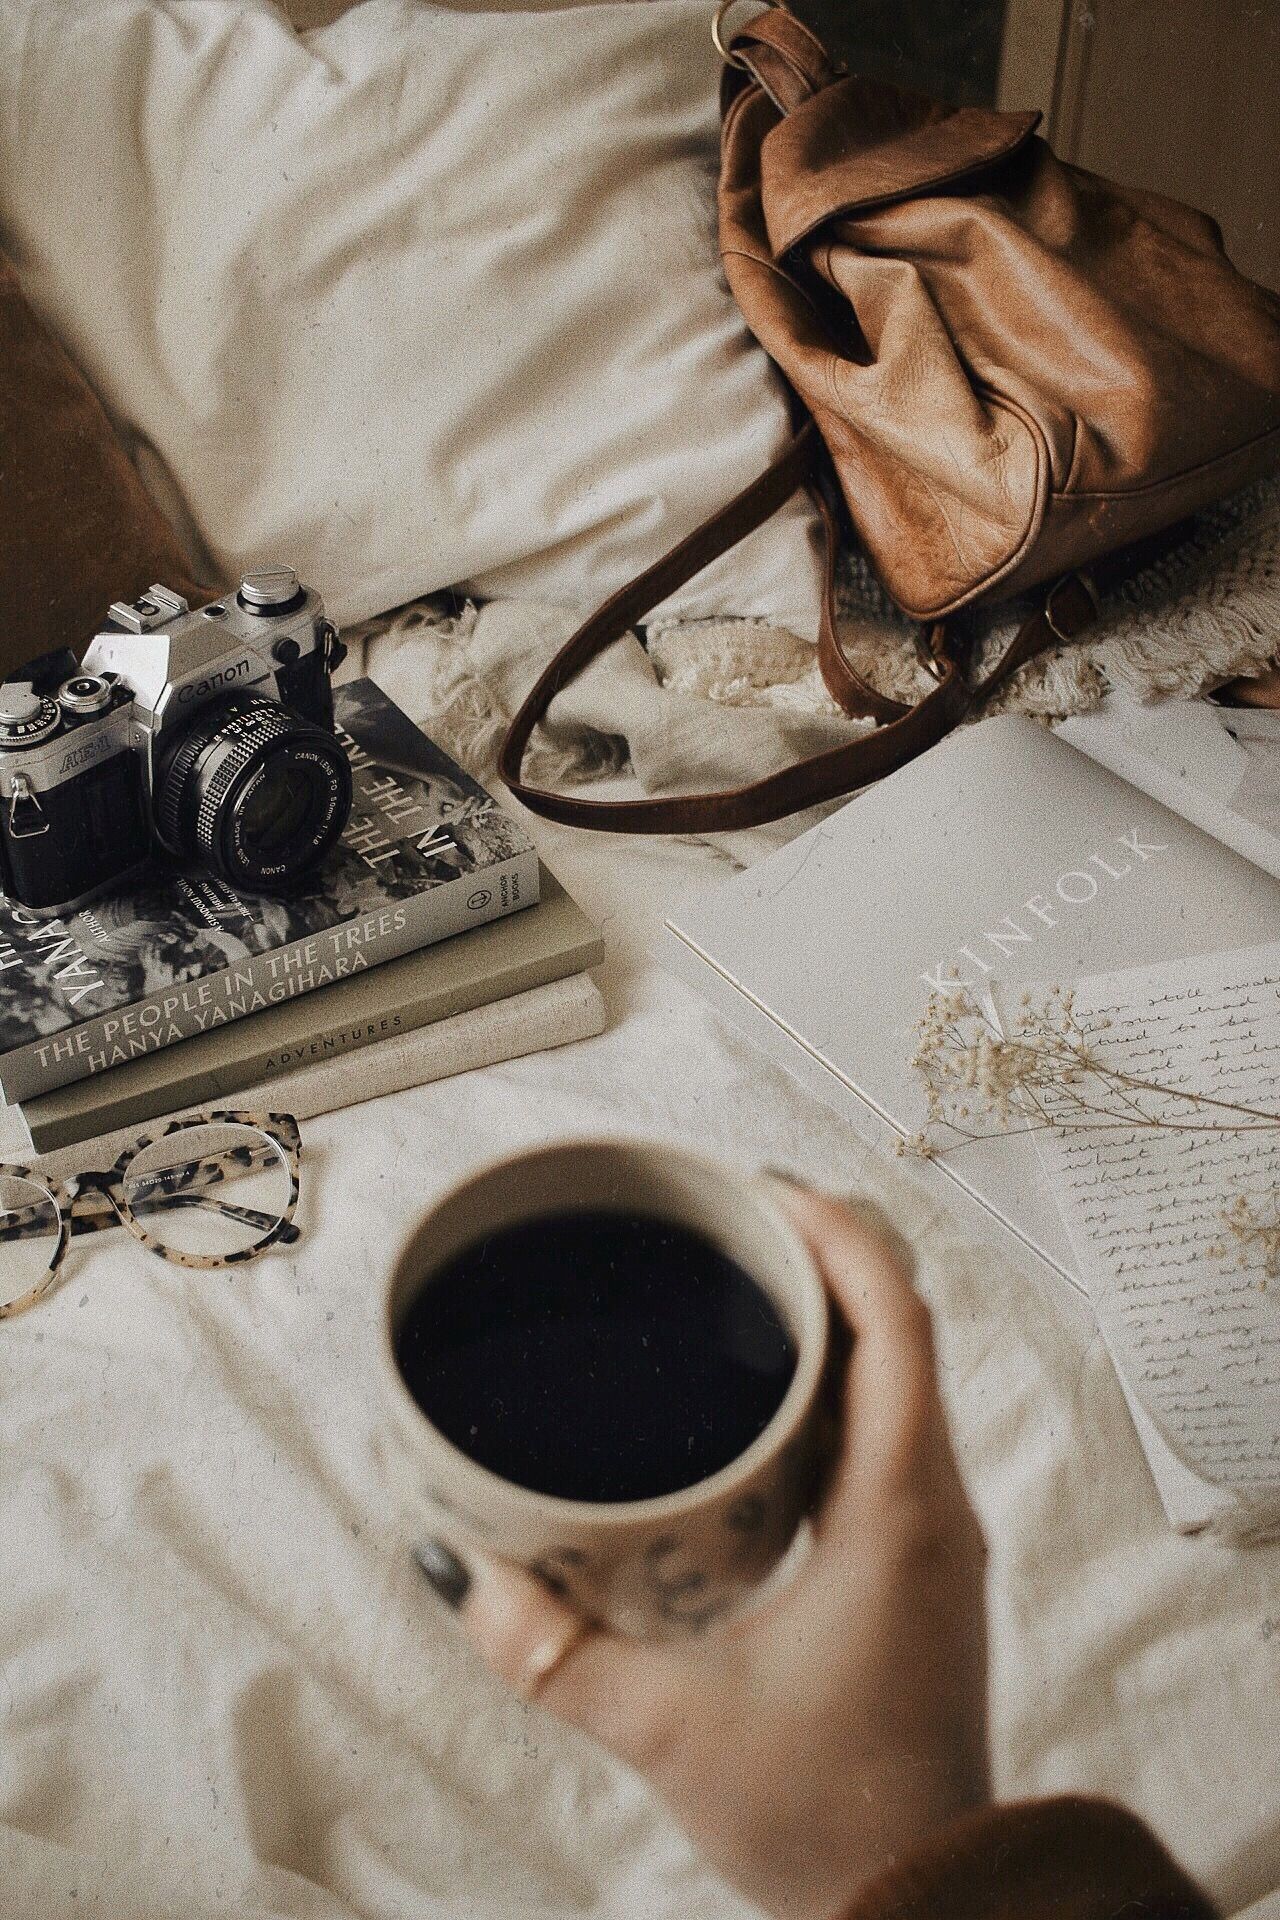 A cup of coffee on a bed with books and a camera - Balance